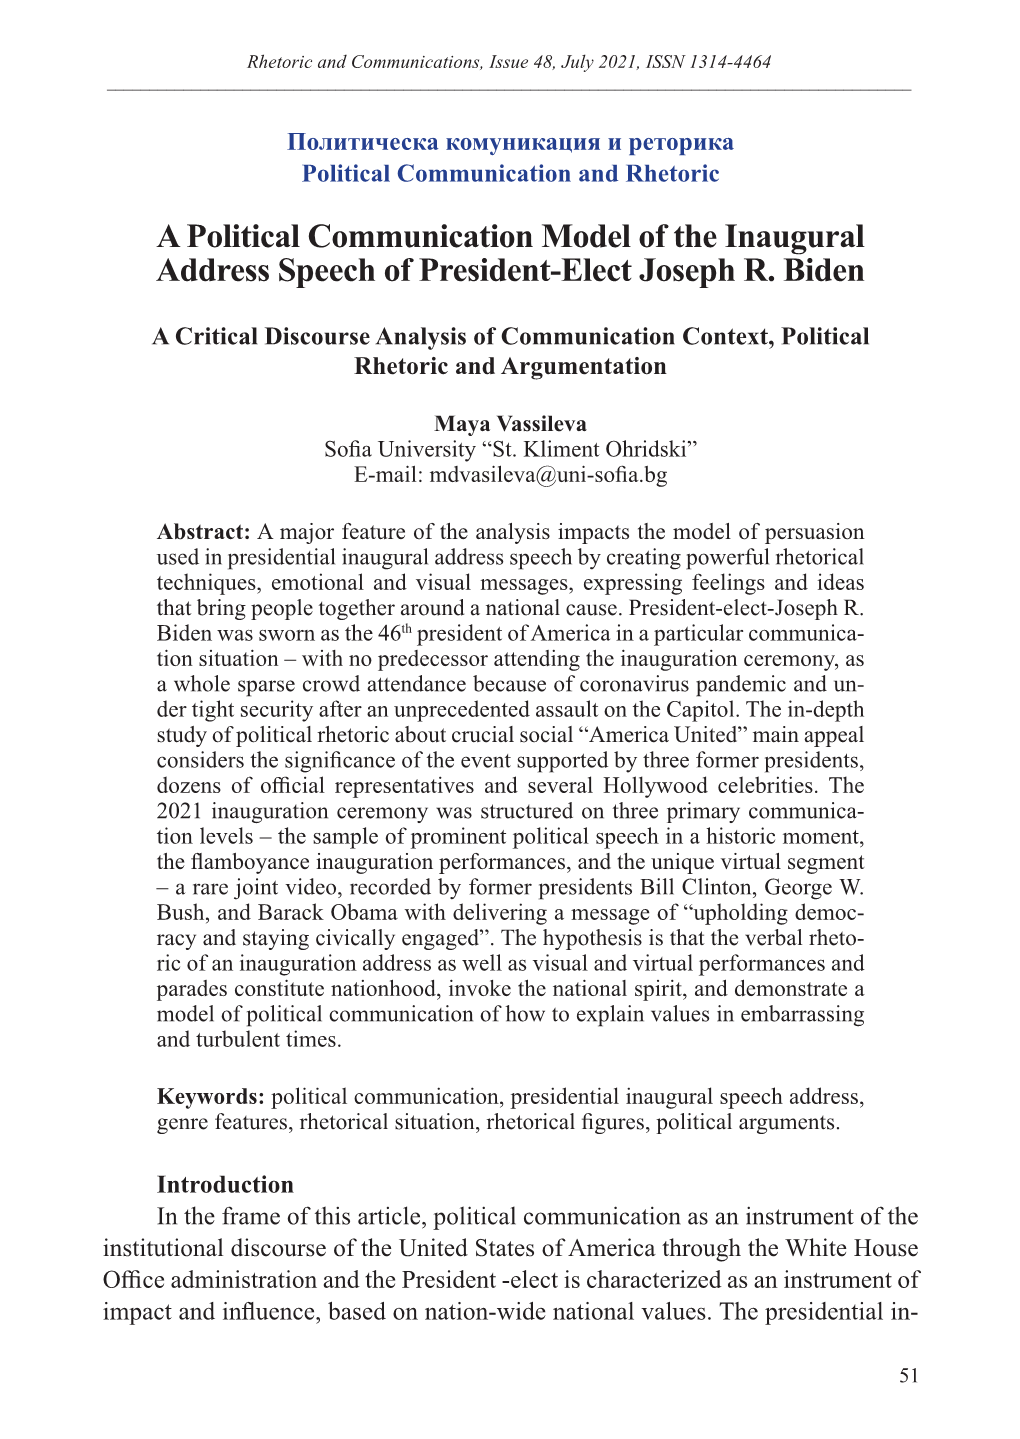 A Political Communication Model of the Inaugural Address Speech of President-Elect Joseph R